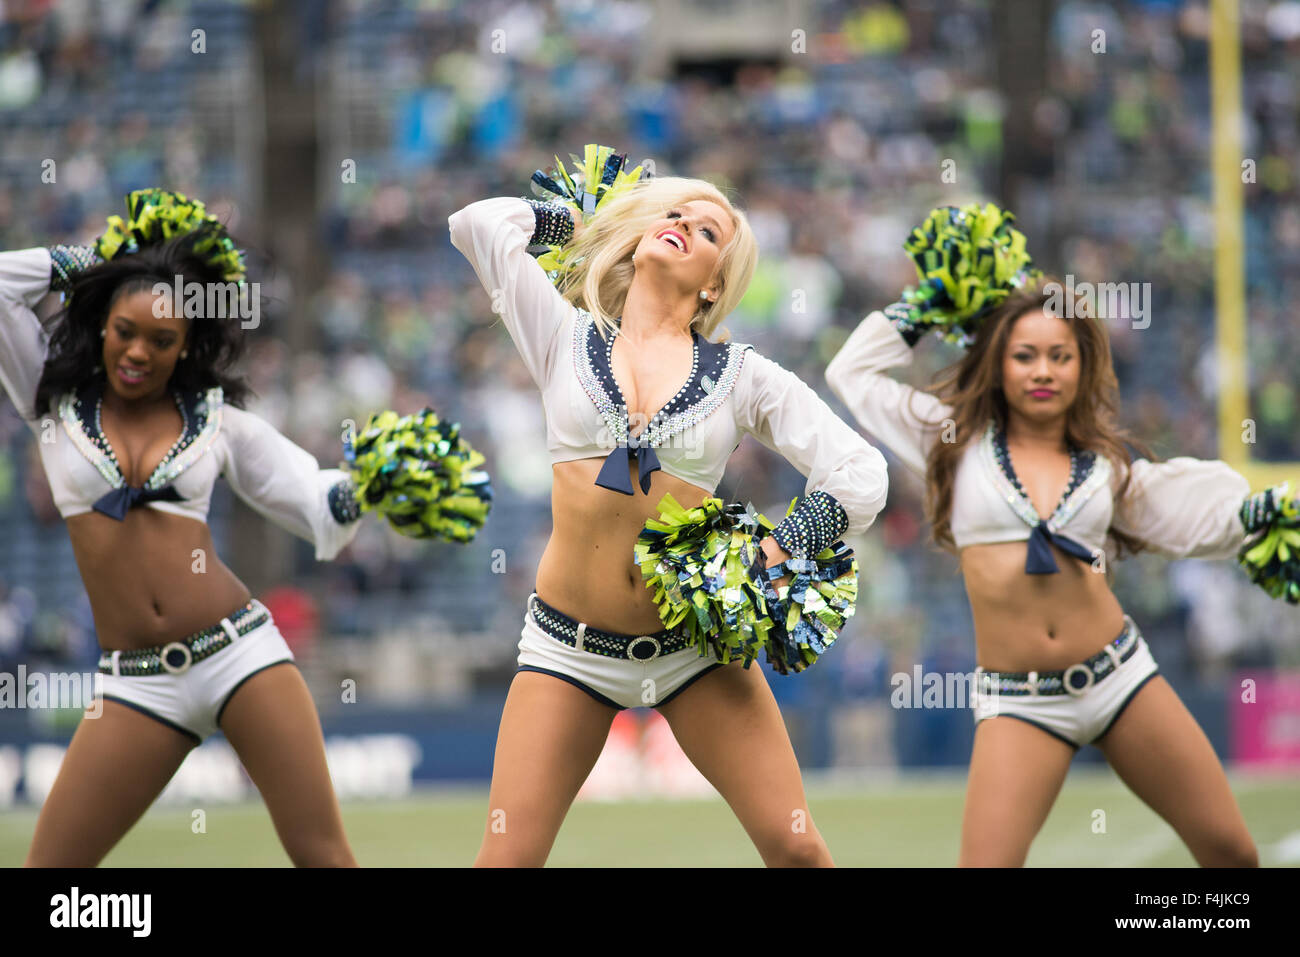 October 18, 2015: Seattle Seahawks Sea Gasl performing during NFL action between the Carolina Panthers and the Seattle Seahawks at CenturyLink Field in Seattle, Washington. The Seattle Seahawks fall to the Carolina Panthers 27 to 23. Joseph Weiser/CSM Stock Photo